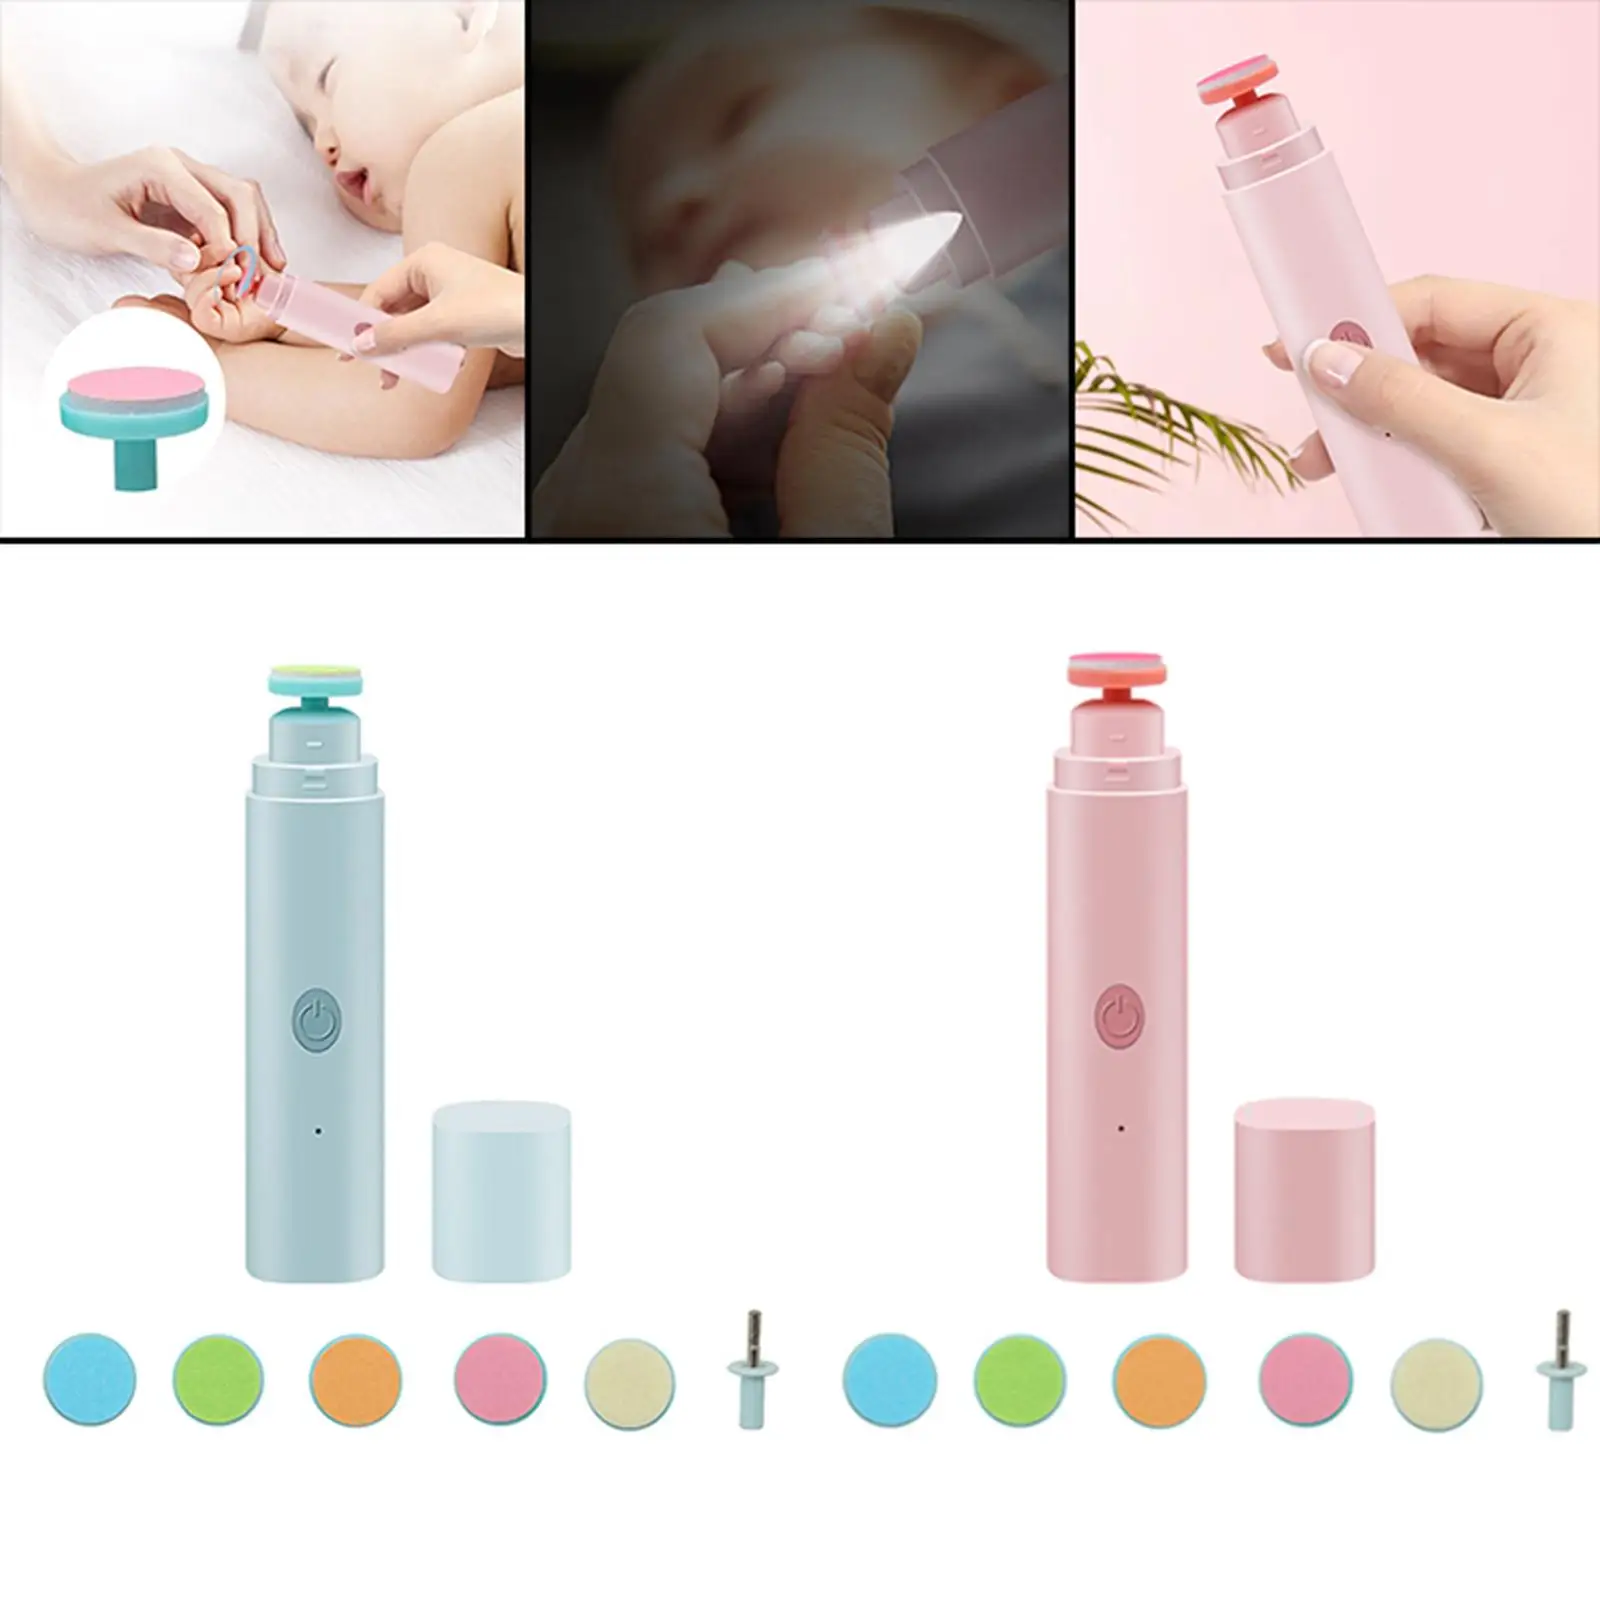 Electric Baby Nail File Drill Safety Trim Polish 6 Grinding Heads Grooming Manicure Care Clipper for Toes Fingernails Infant